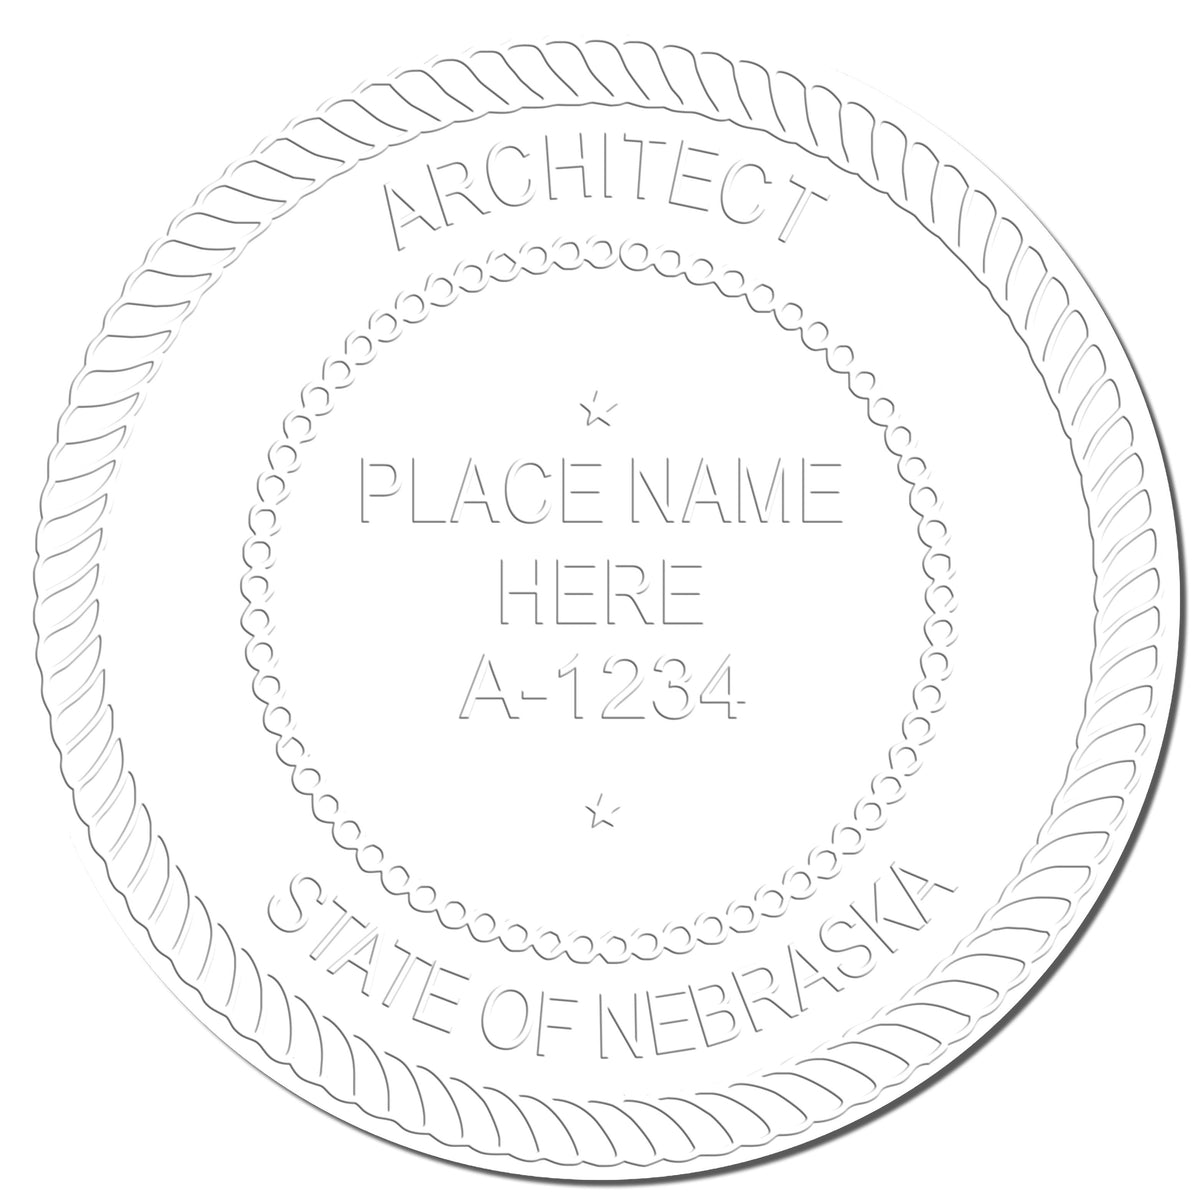 This paper is stamped with a sample imprint of the Gift Nebraska Architect Seal, signifying its quality and reliability.